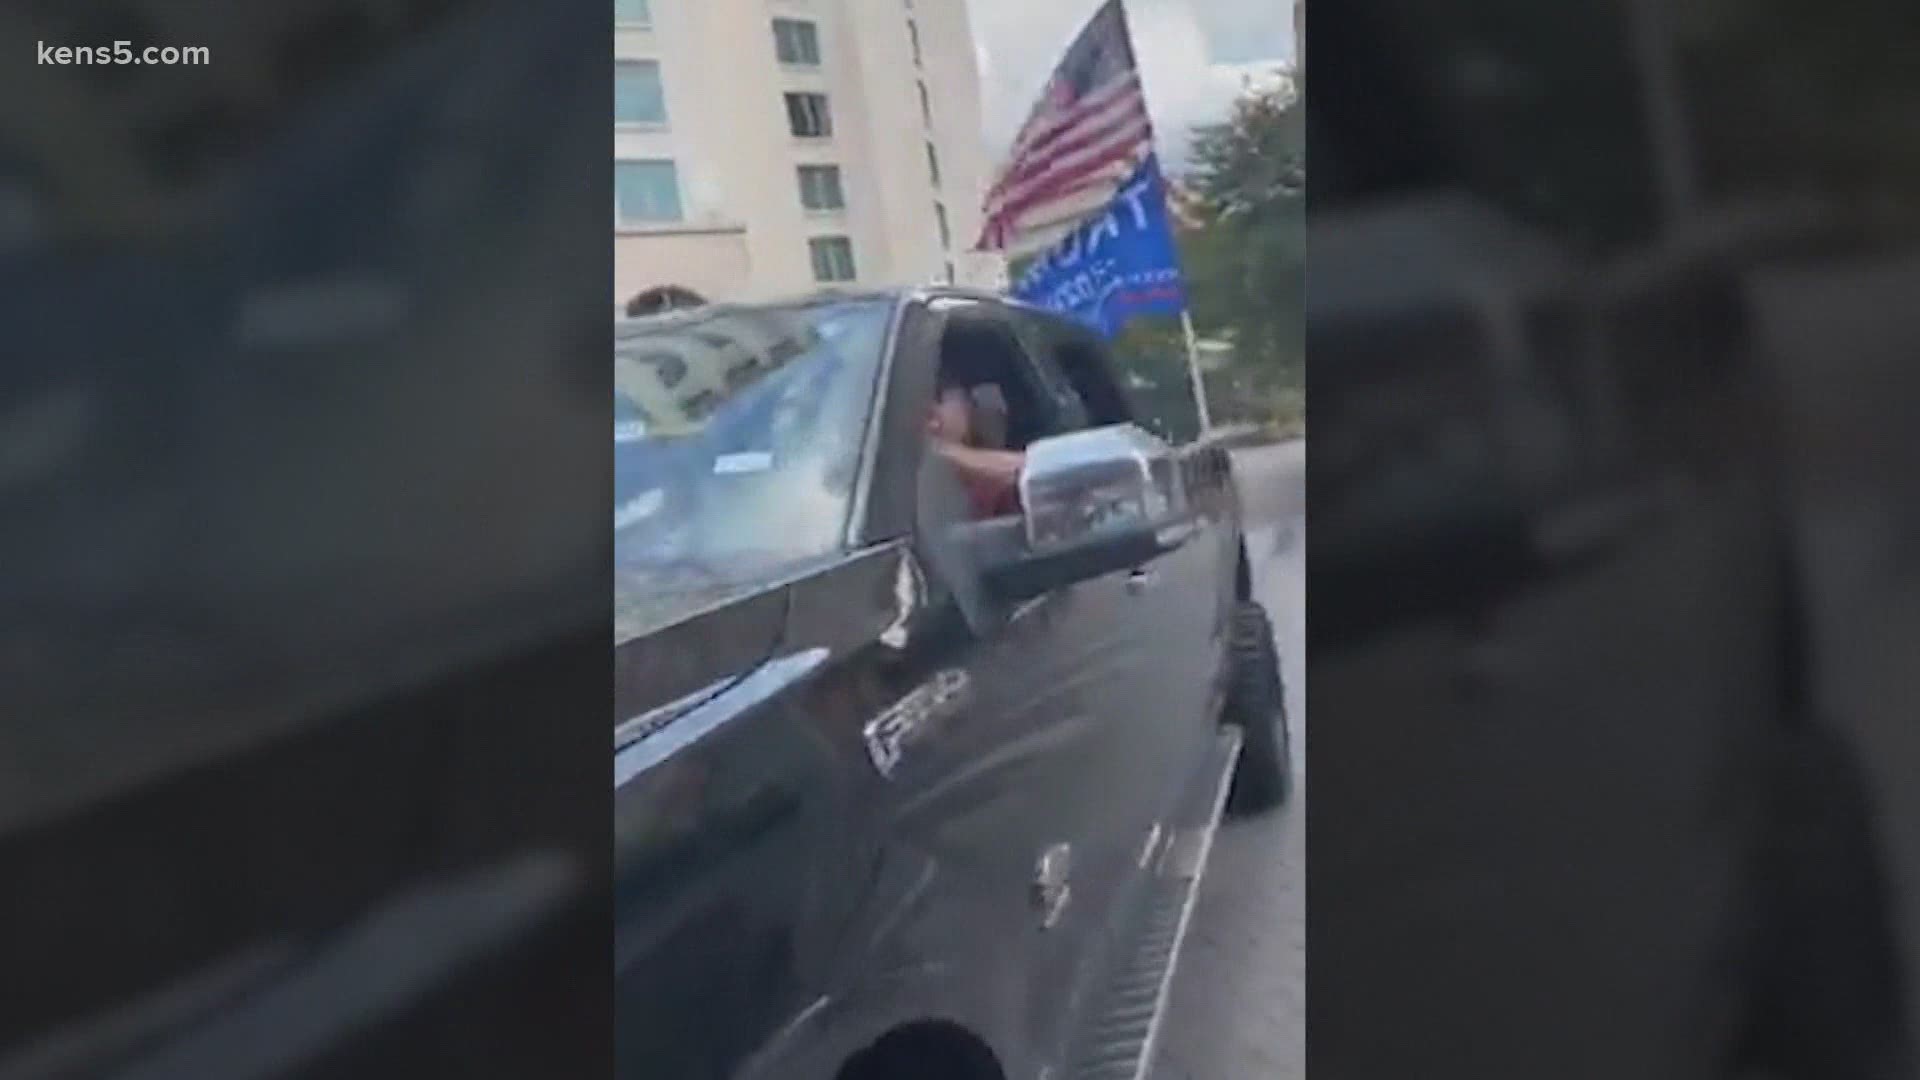 KENS 5 spoke to an organizer who was there and felt intimidated, and the driver who says he didn't want to hit anybody, just move them off the road.